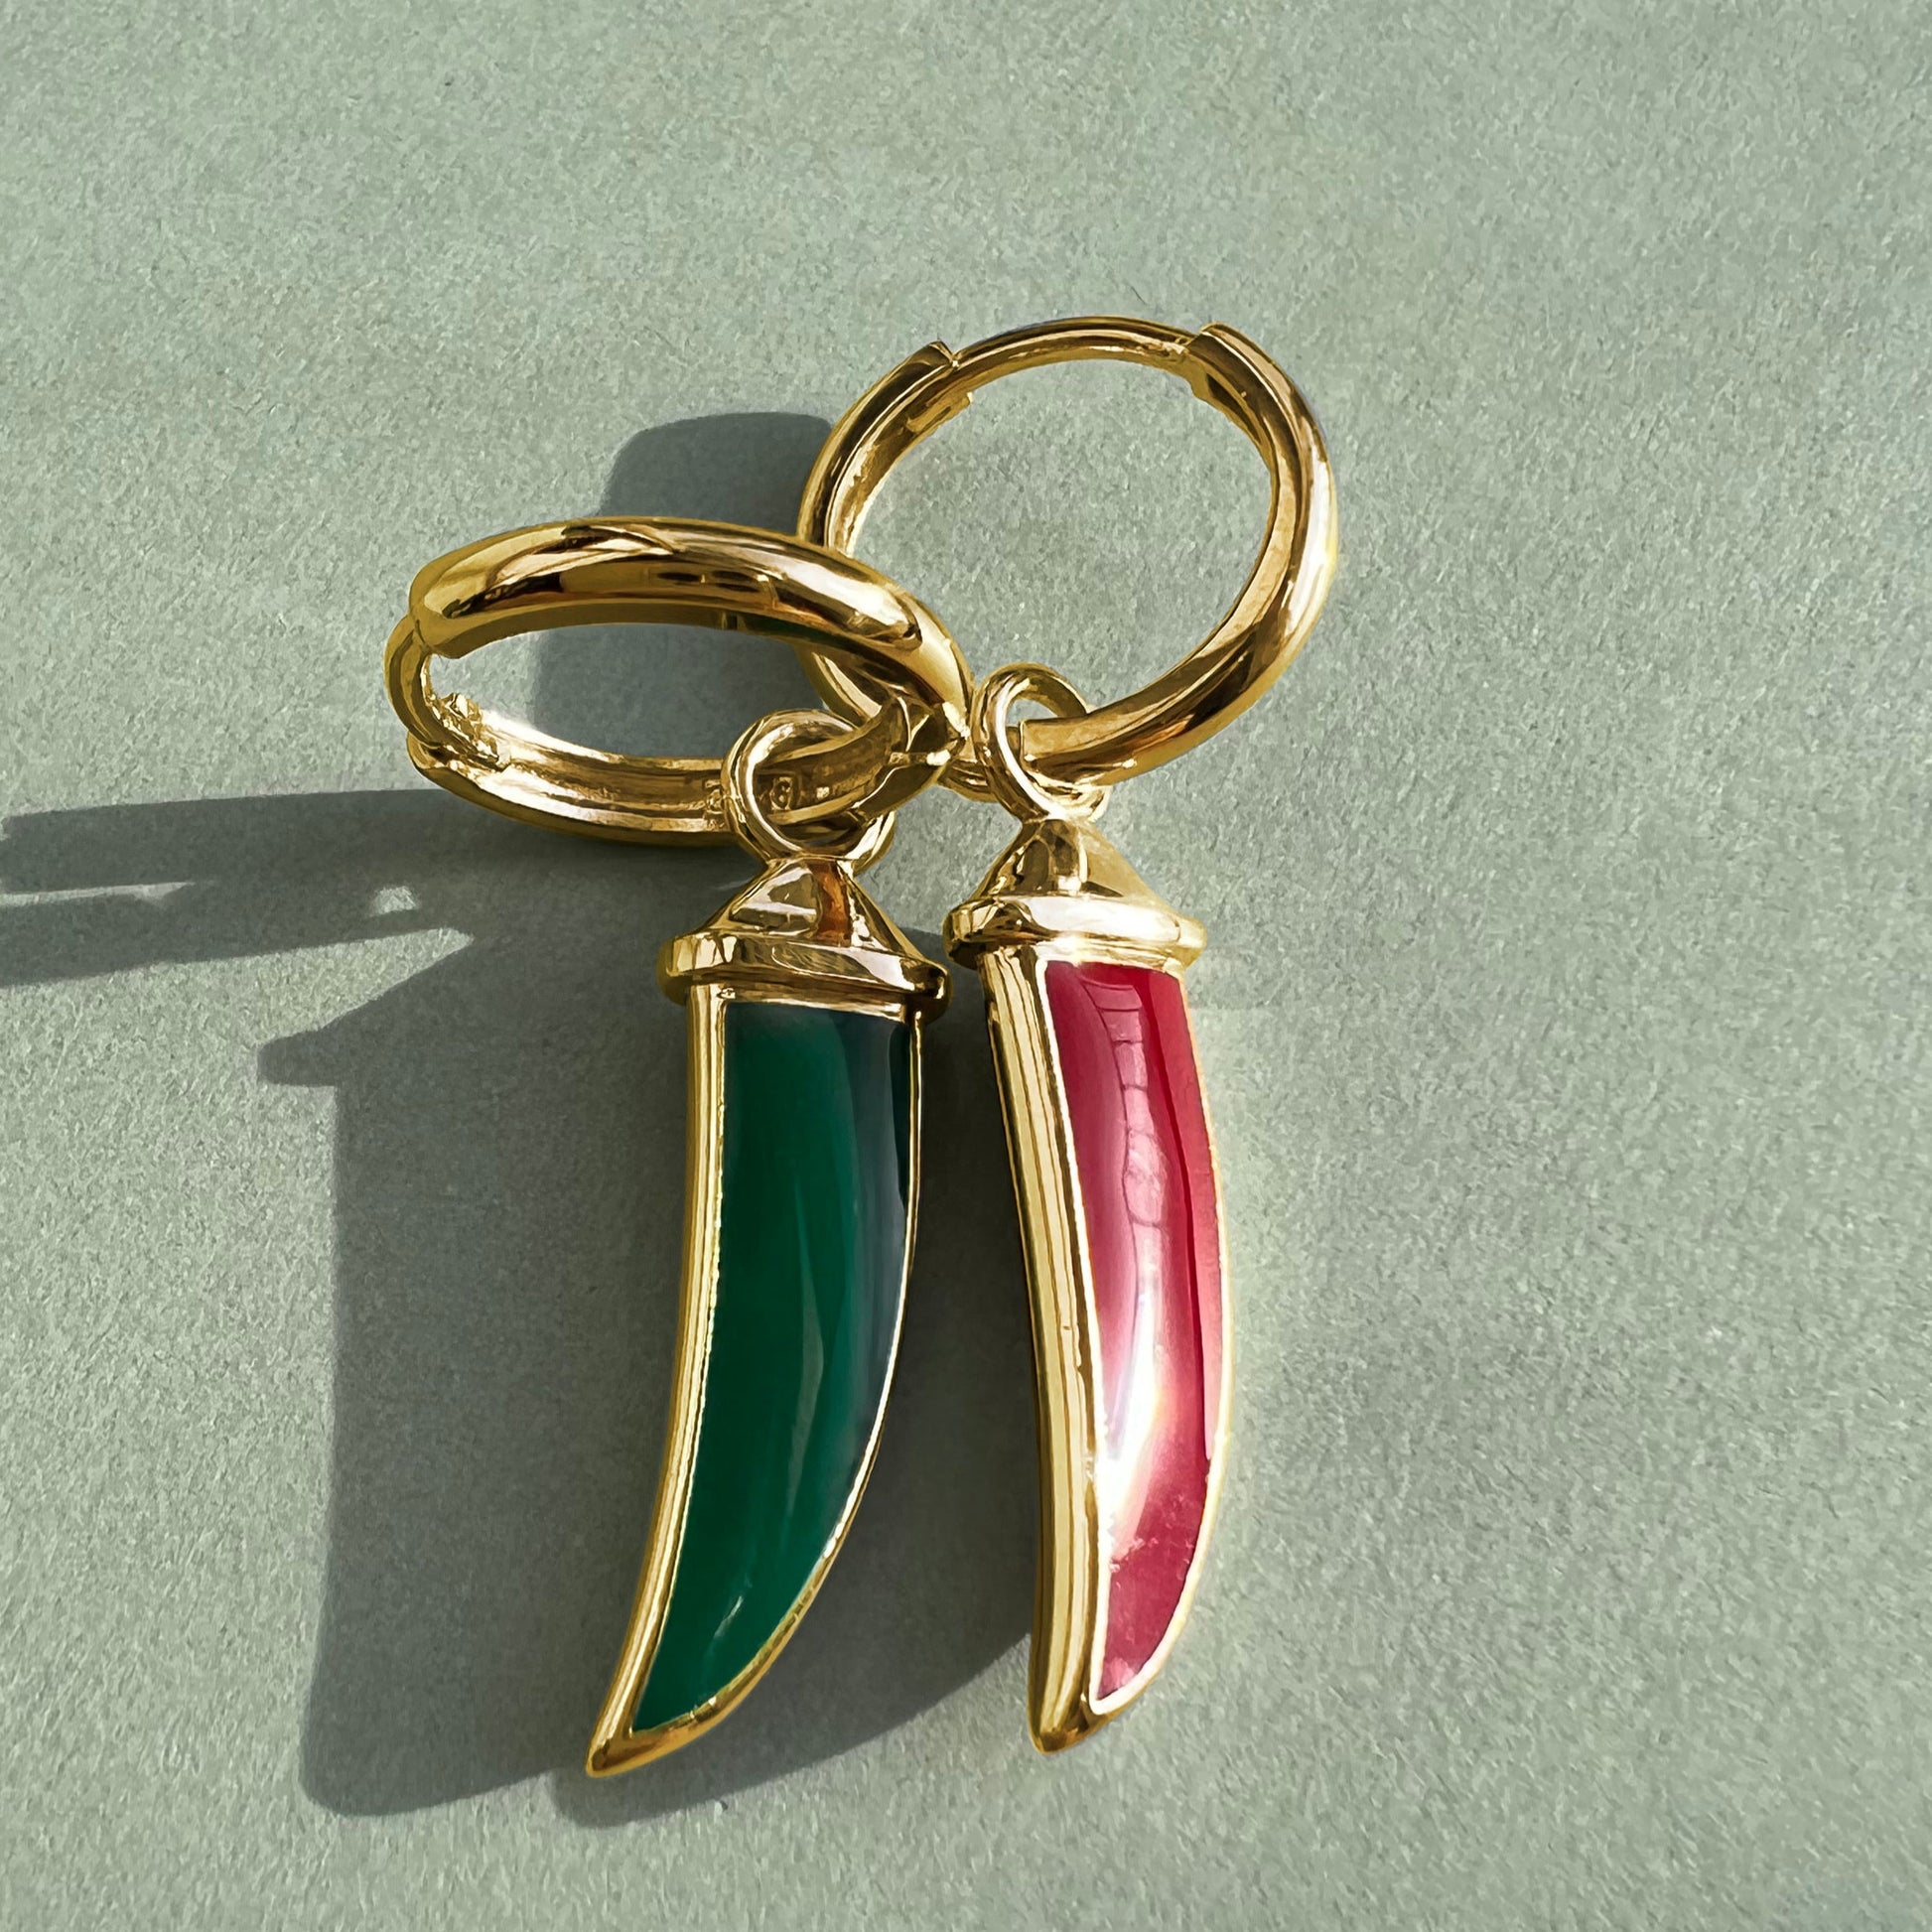 EARRING "HOT CHILI' / SOLID GOLD & COLORED ENAMEL